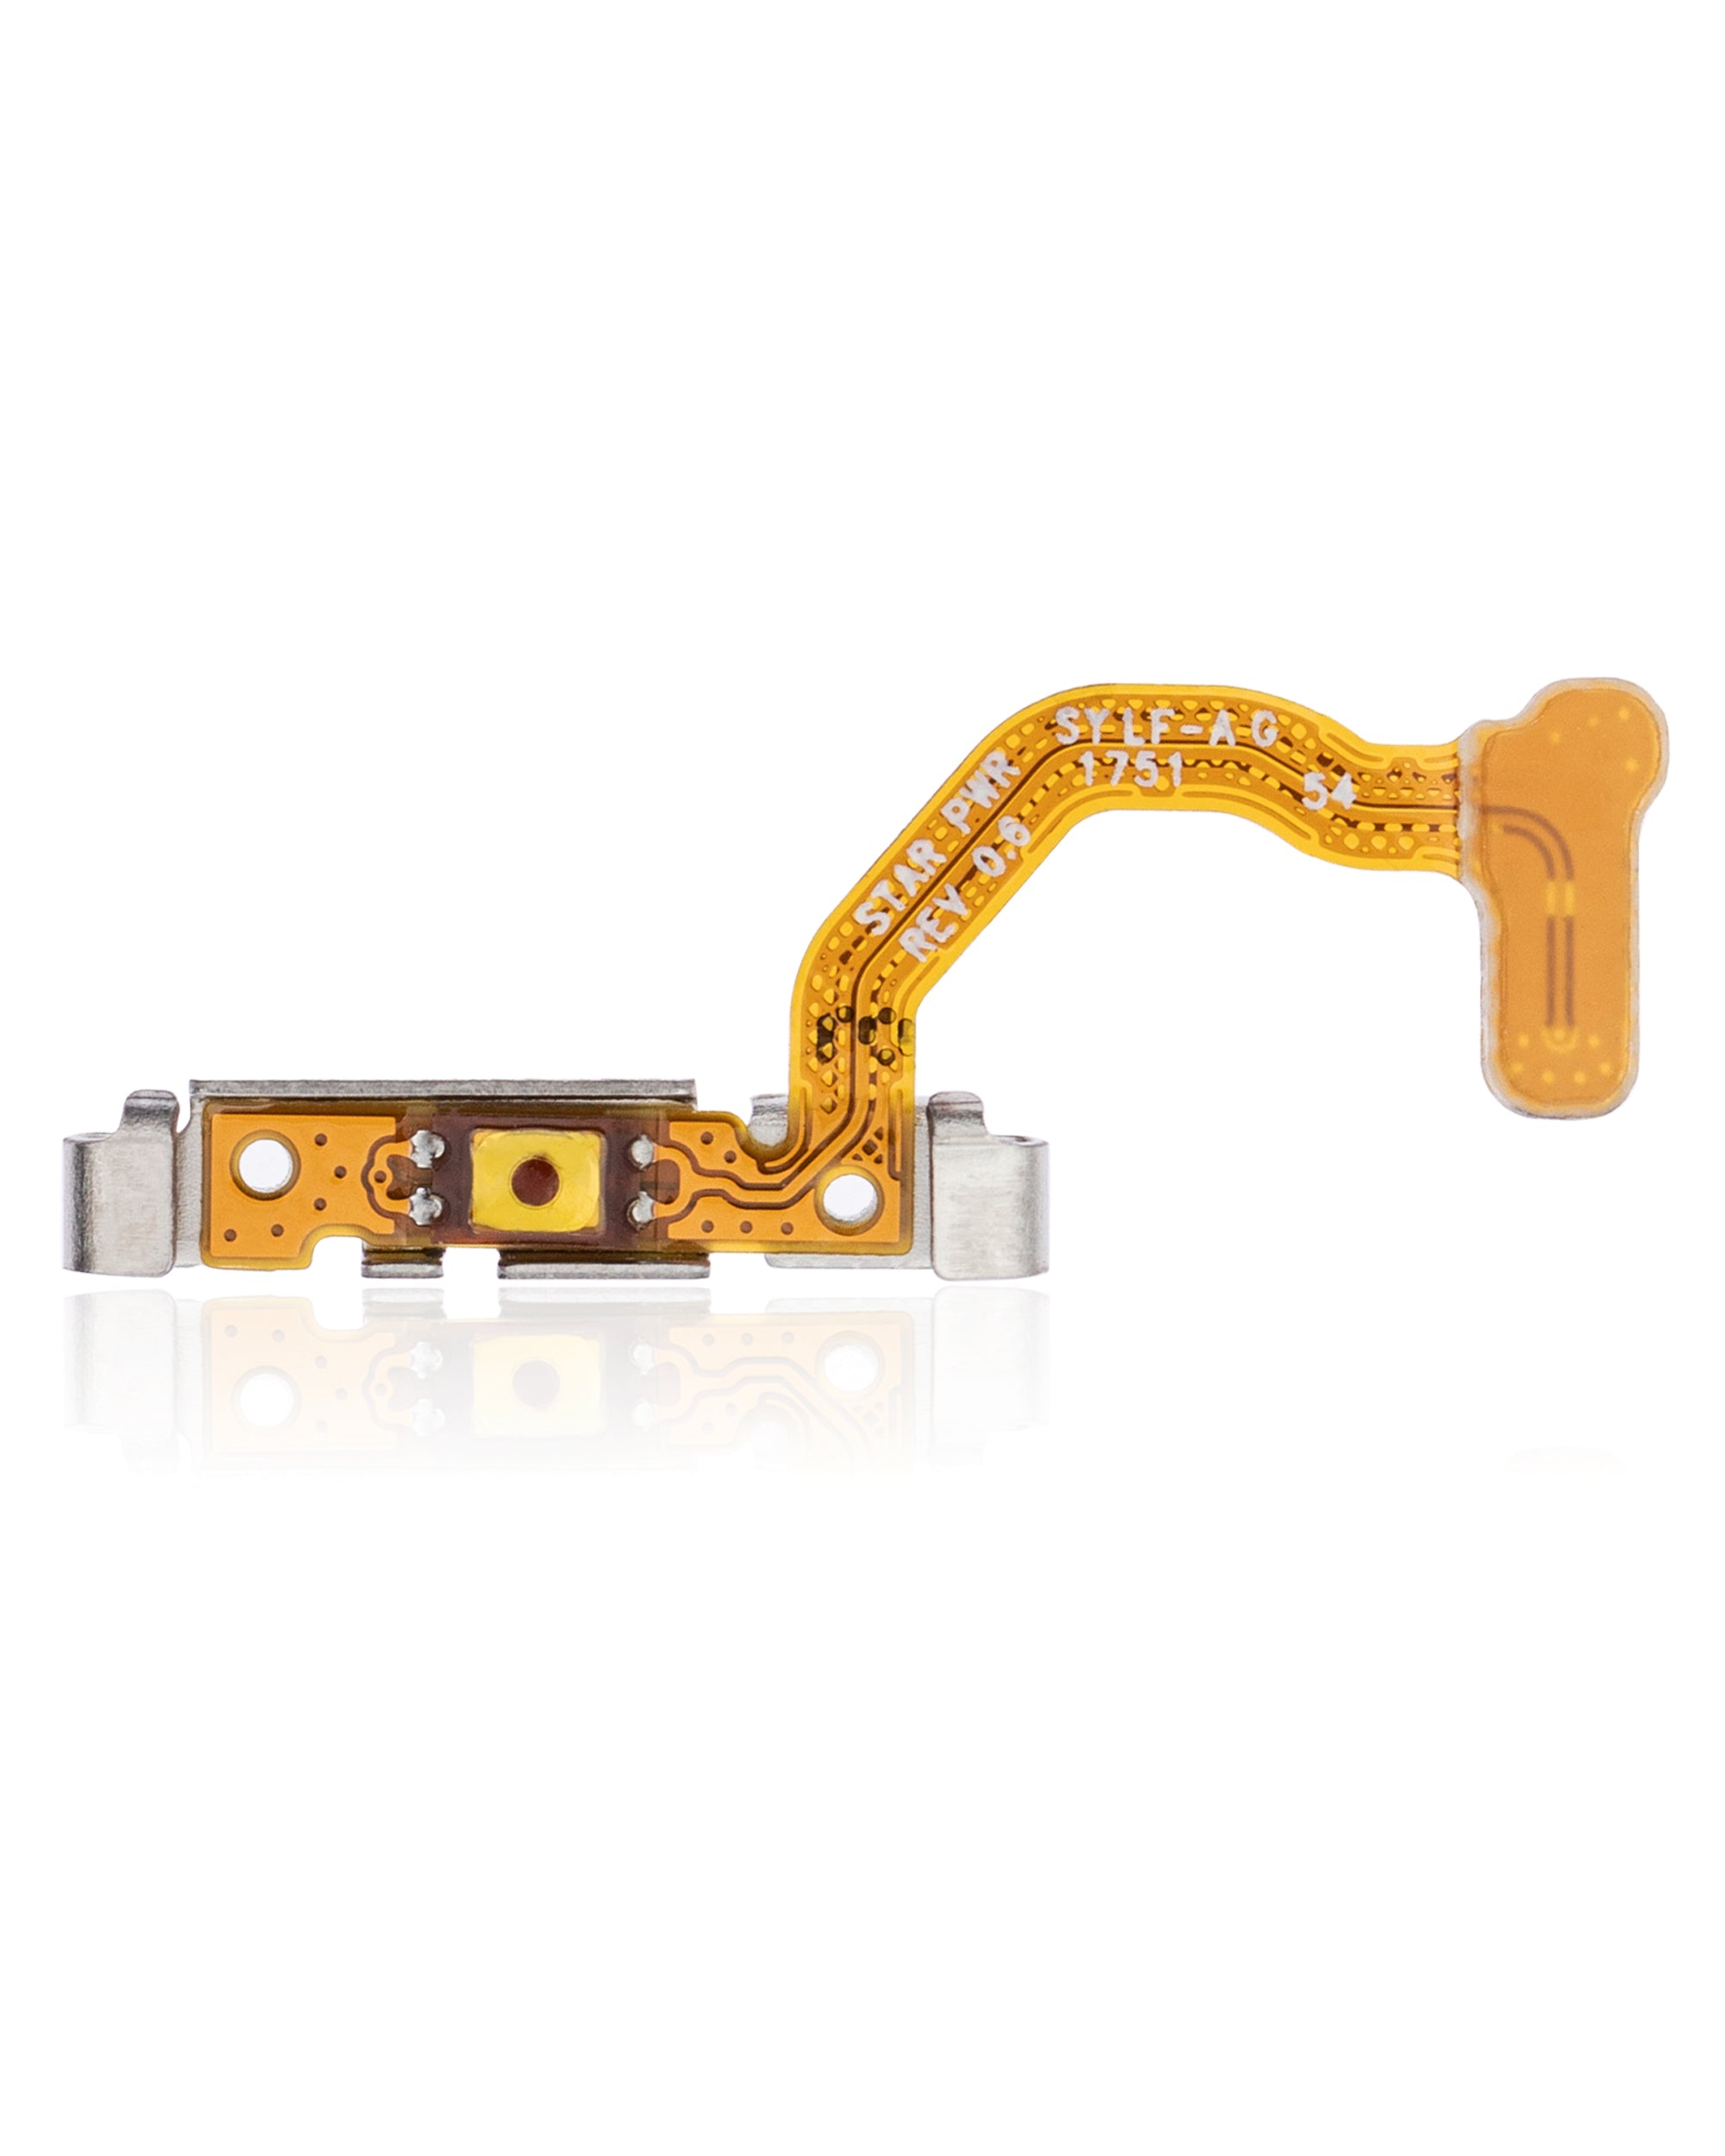 For Samsung Galaxy S9 / S9 Plus Power Button Flex Cable Replacement